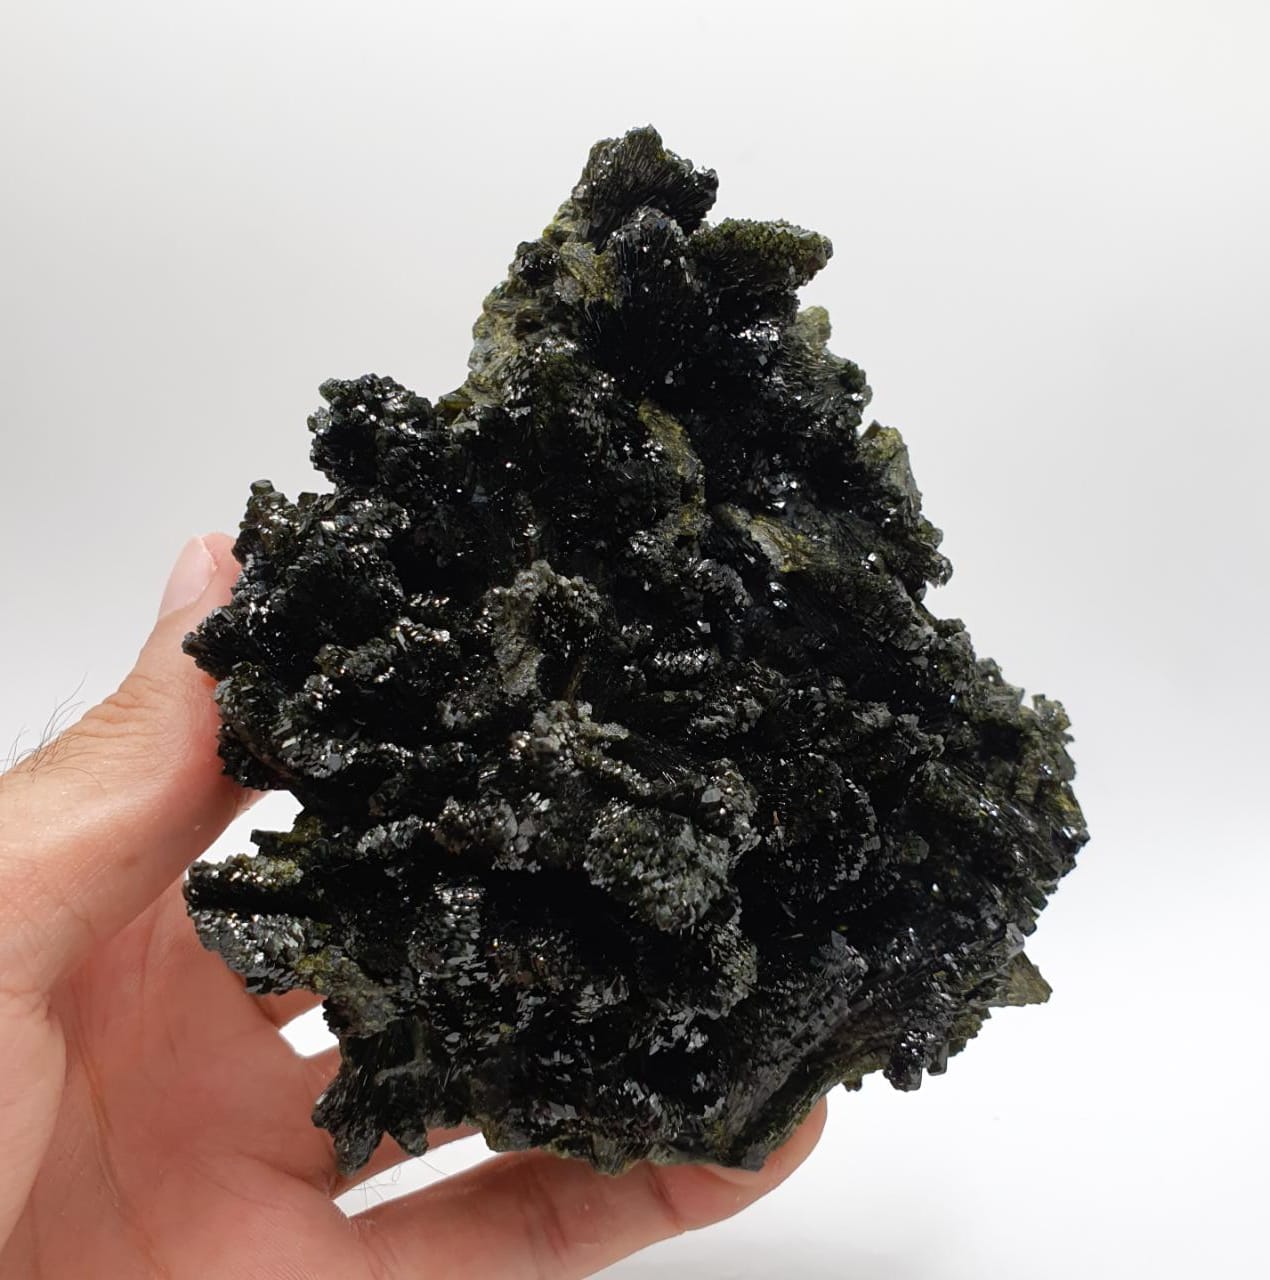 Gorgeous Dendritic Shape Epidote Cluster with Vitreous Luster